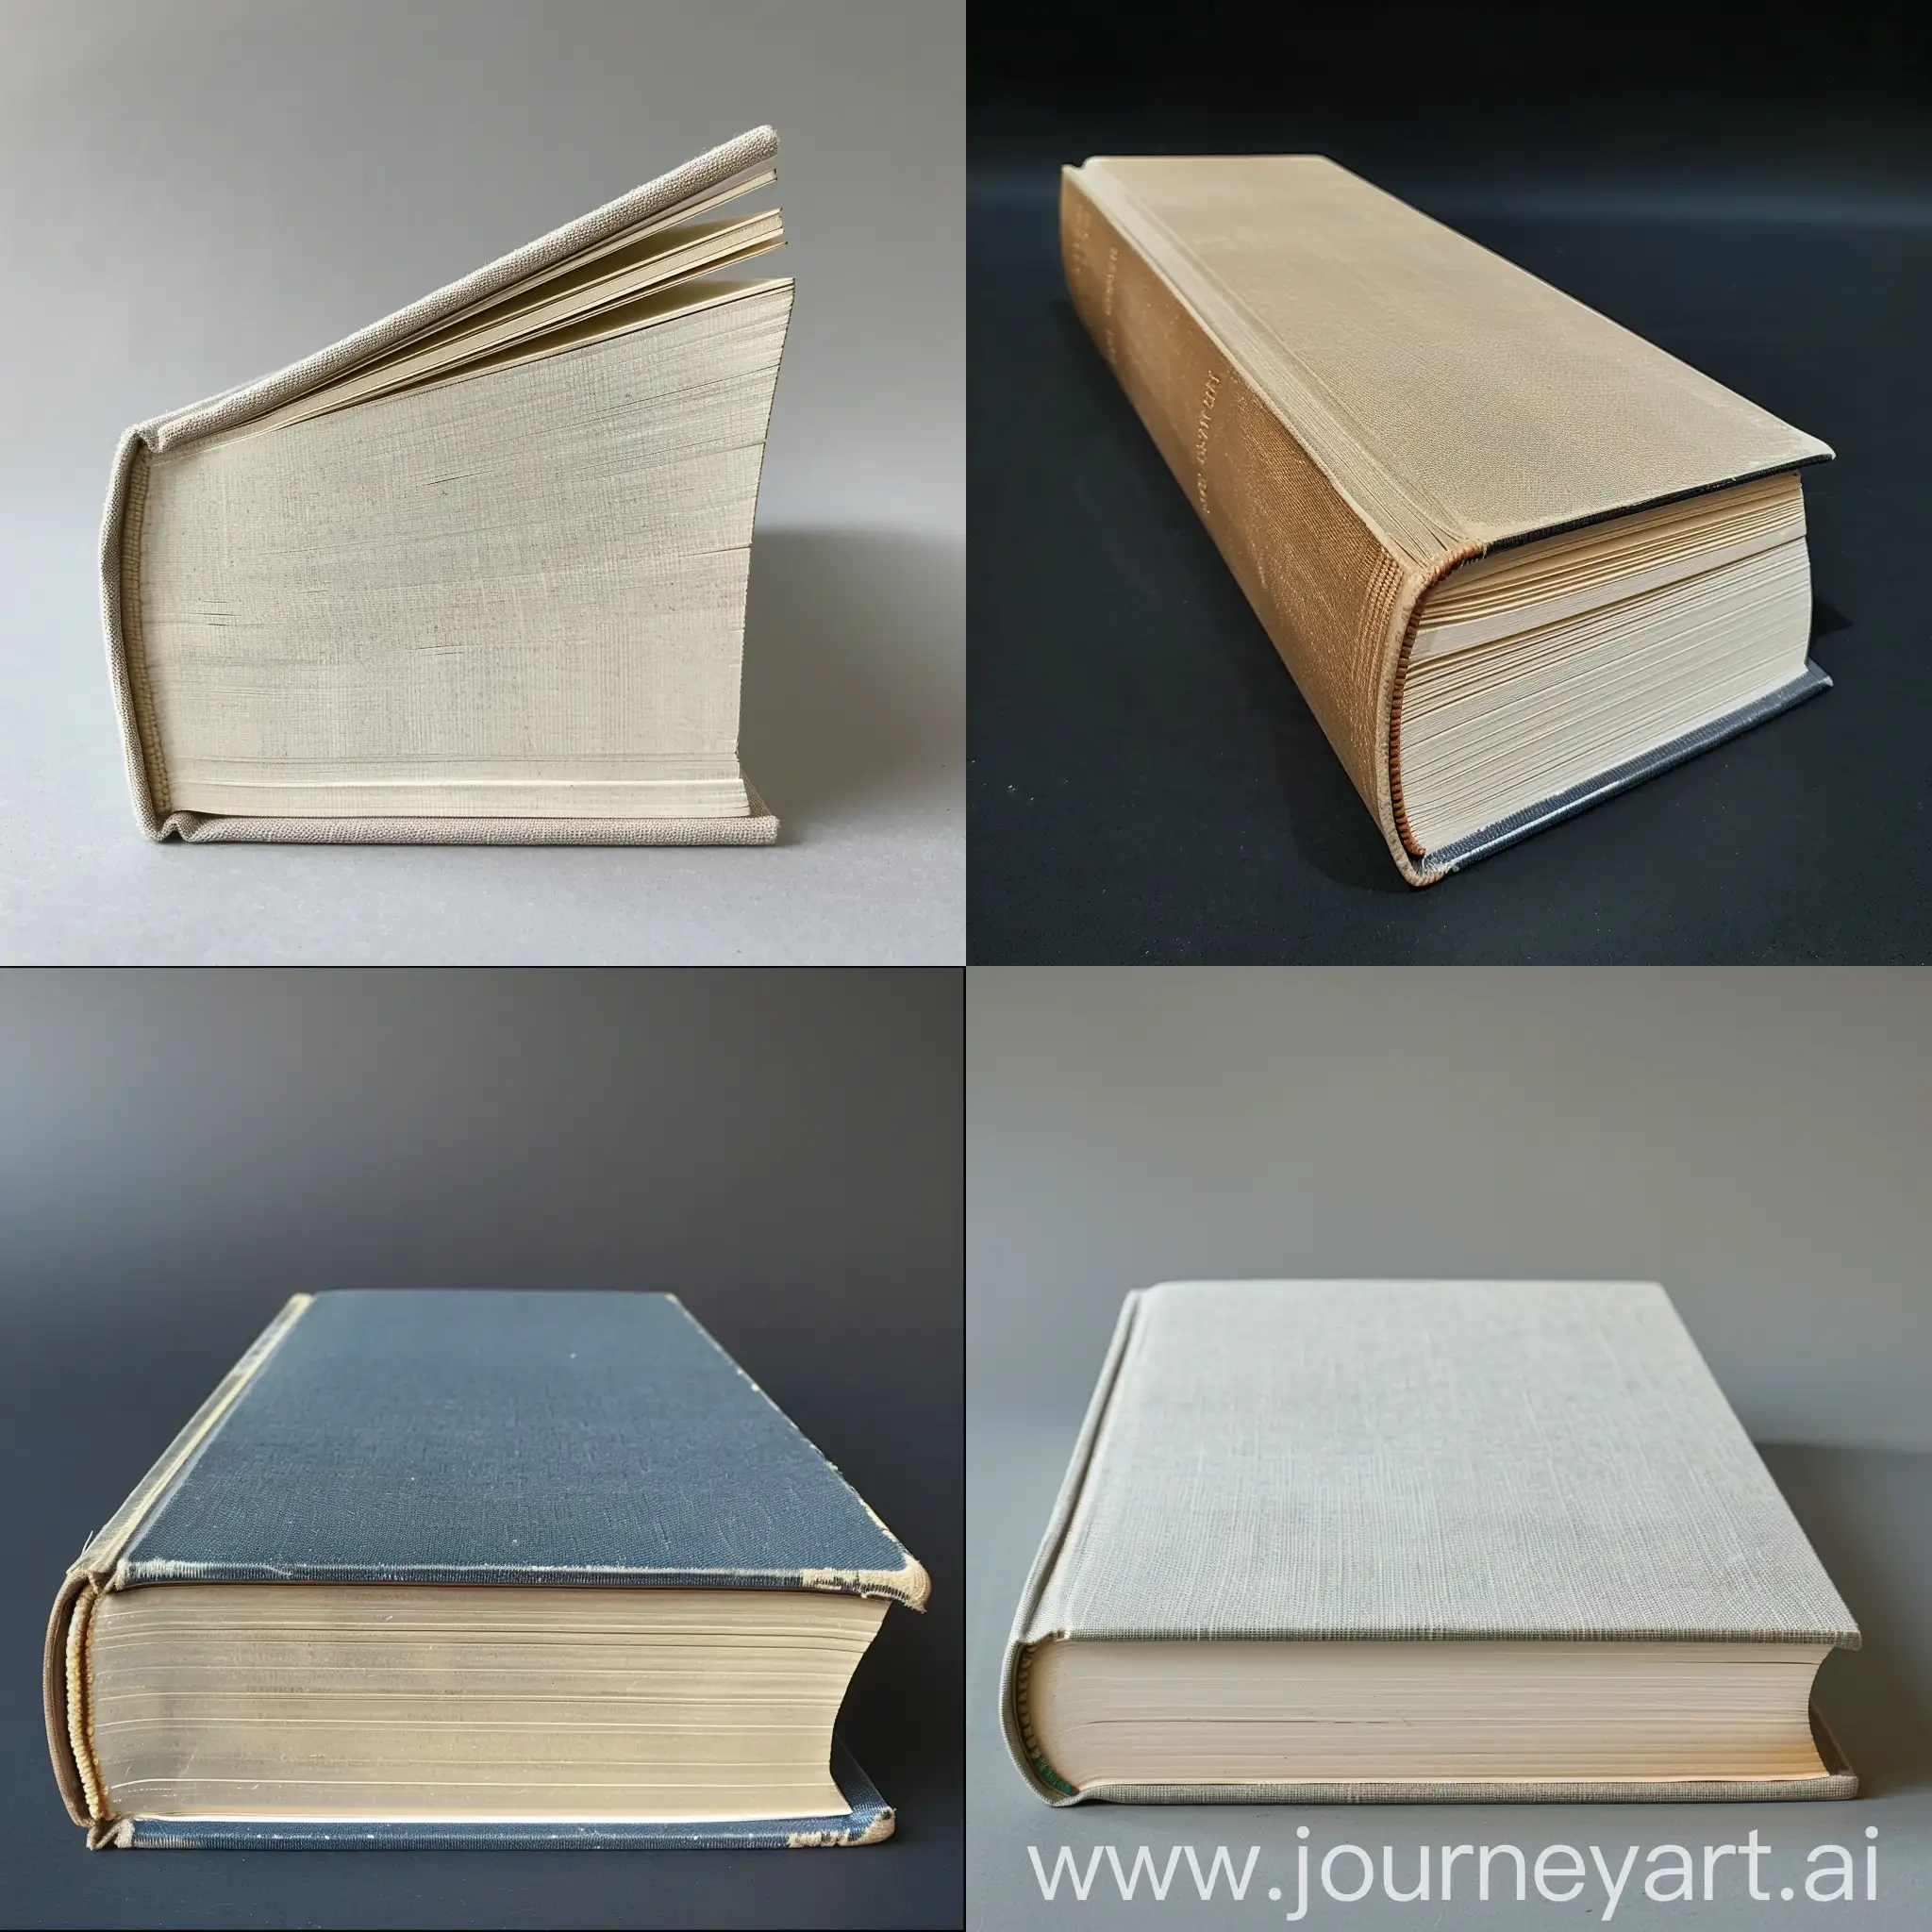 Opened-Book-with-Spine-Facing-Up